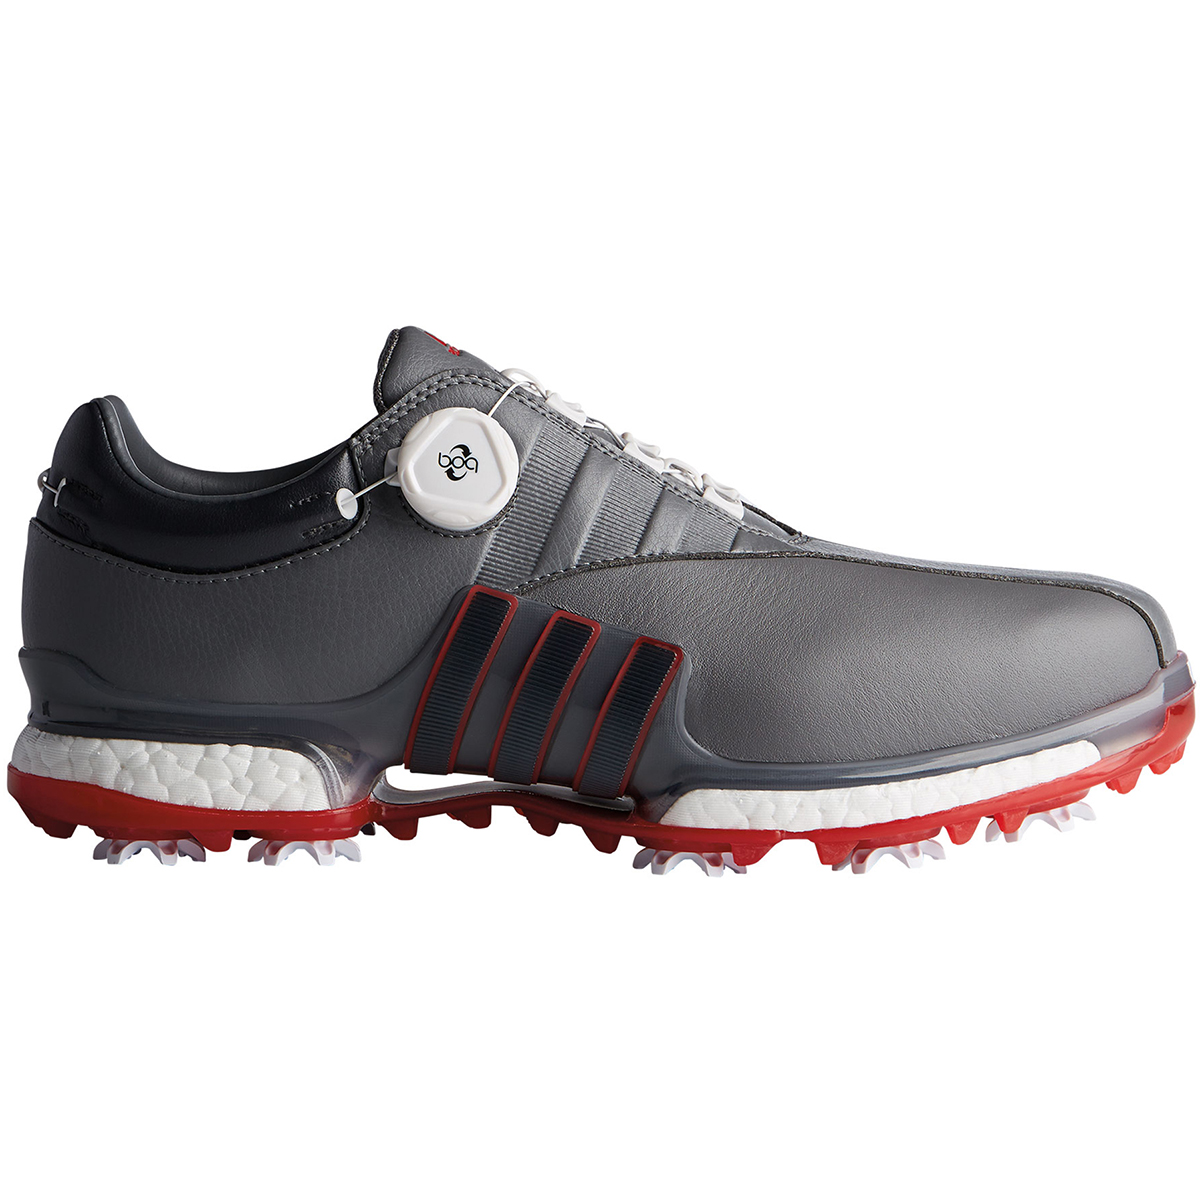 adidas Men's Tour360 BOA Waterproof Golf Shoes from golf